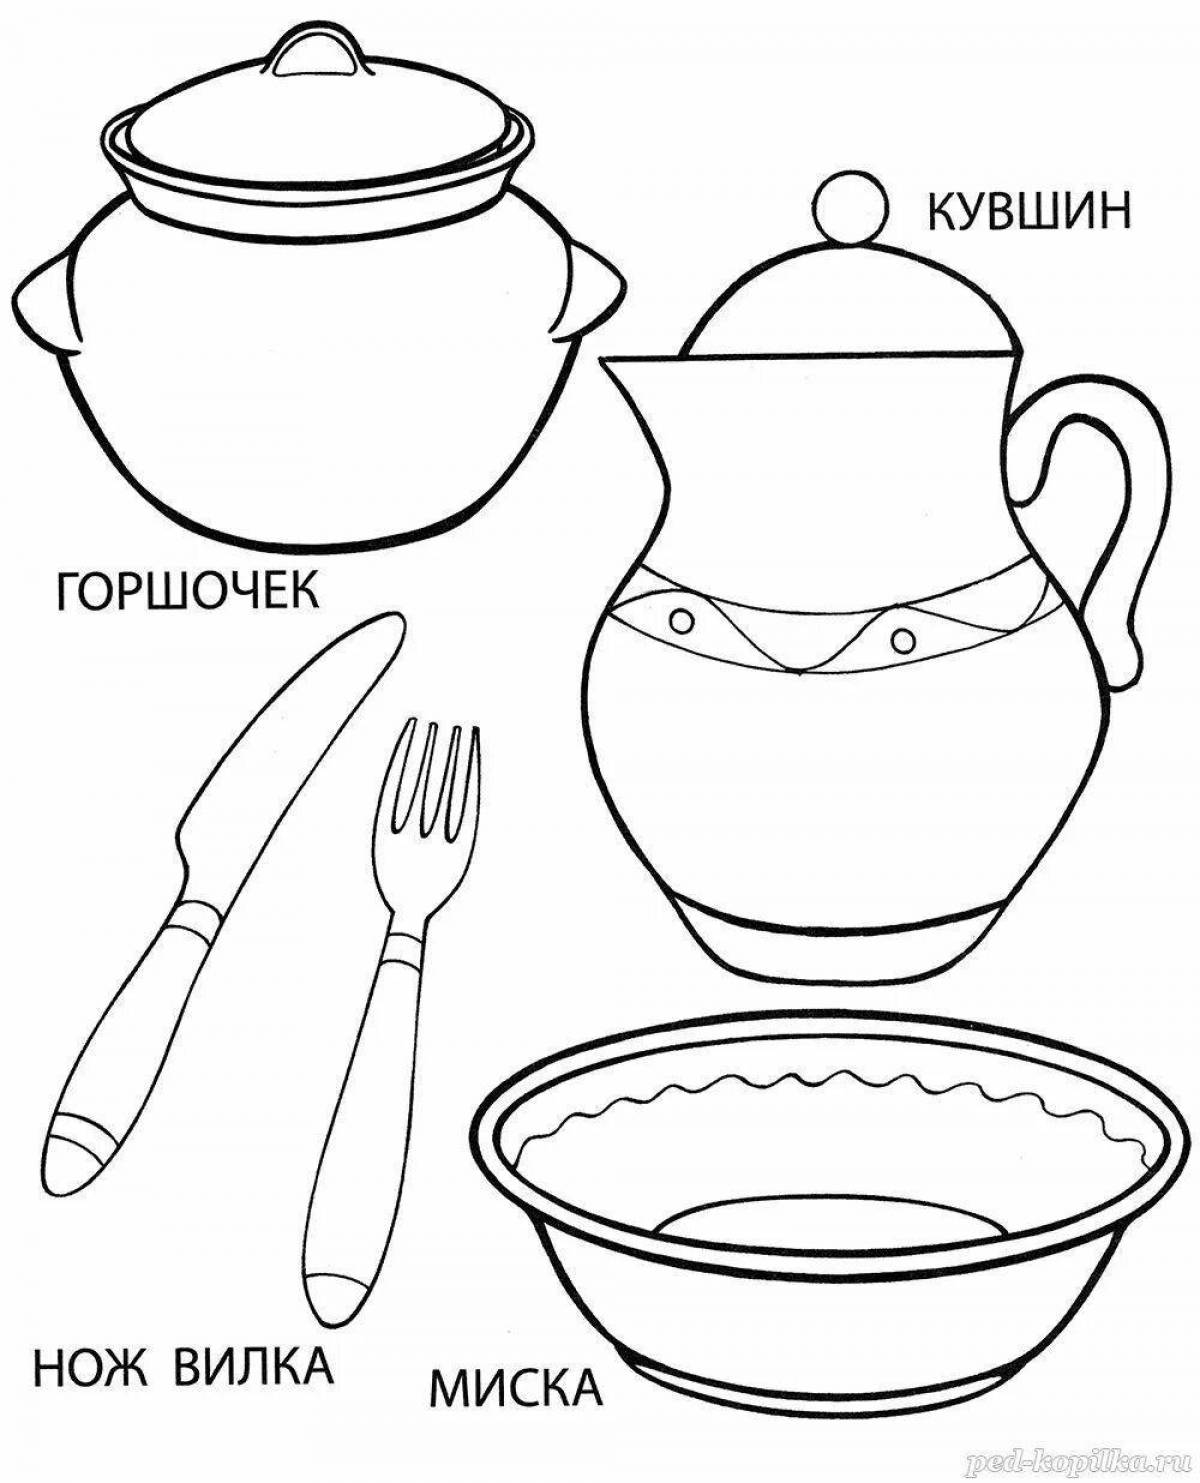 Colourful coloring tableware for preschoolers